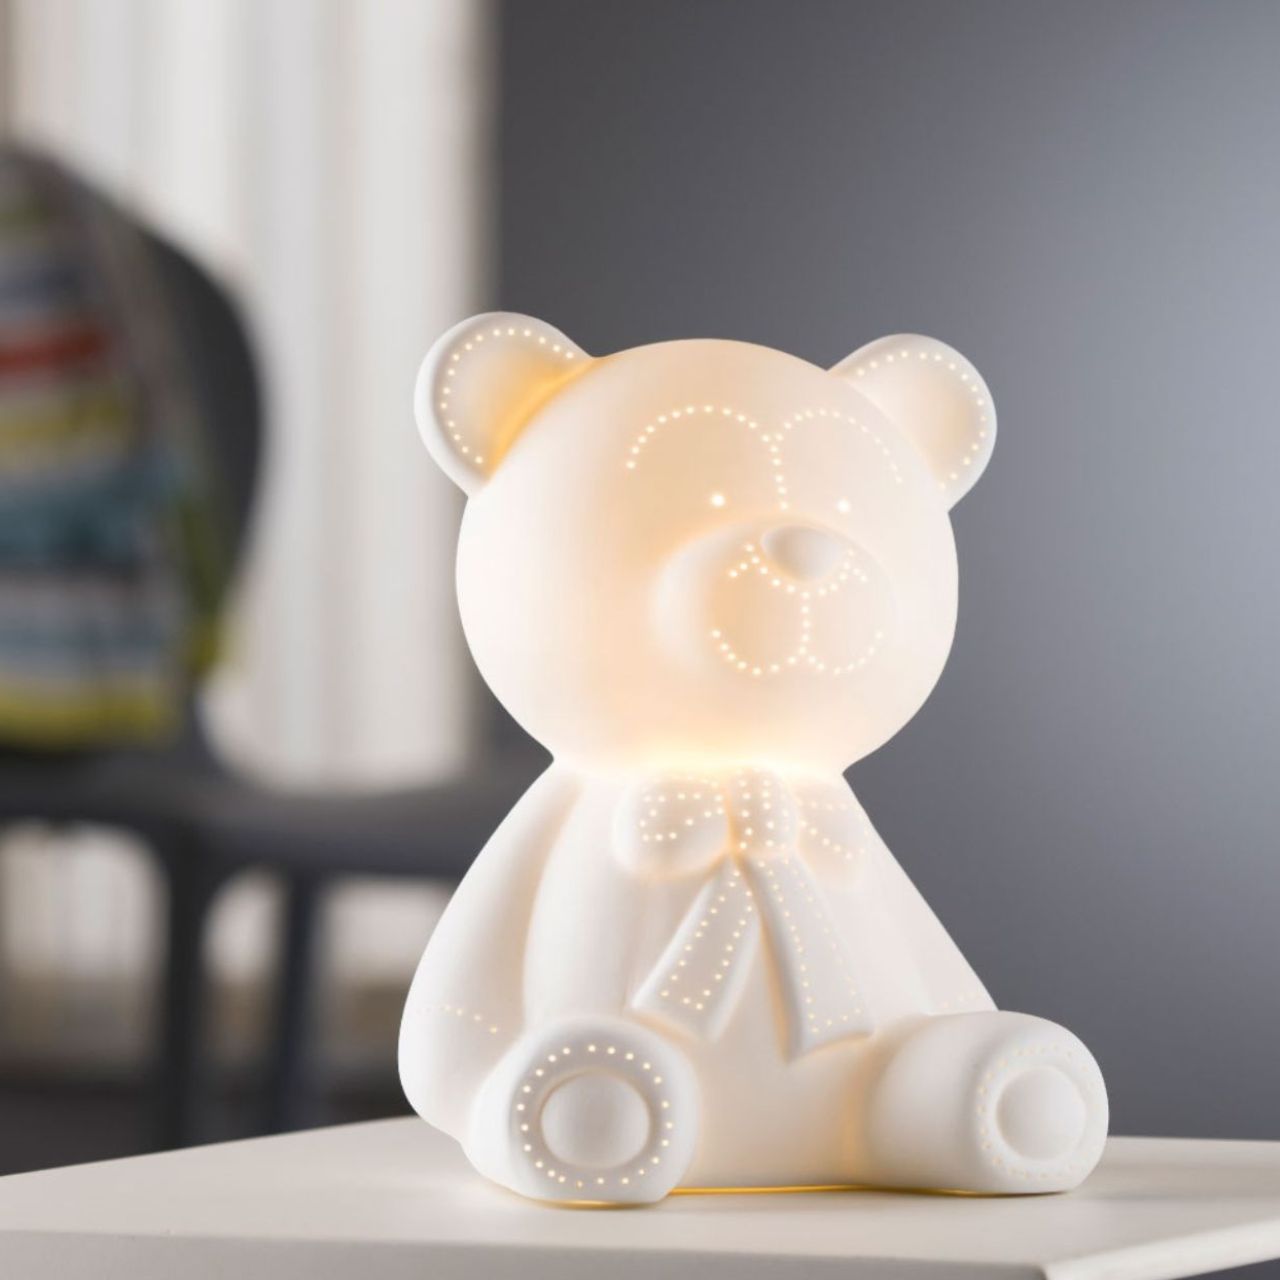 This Teddy Bear Luminaire is simply stunning. Ideal for a nursery or children's bedroom, this Teddy Bear is an ideal bedside lamp and it is sure to create a soft mood to allow your little ones to drift off to sleep.